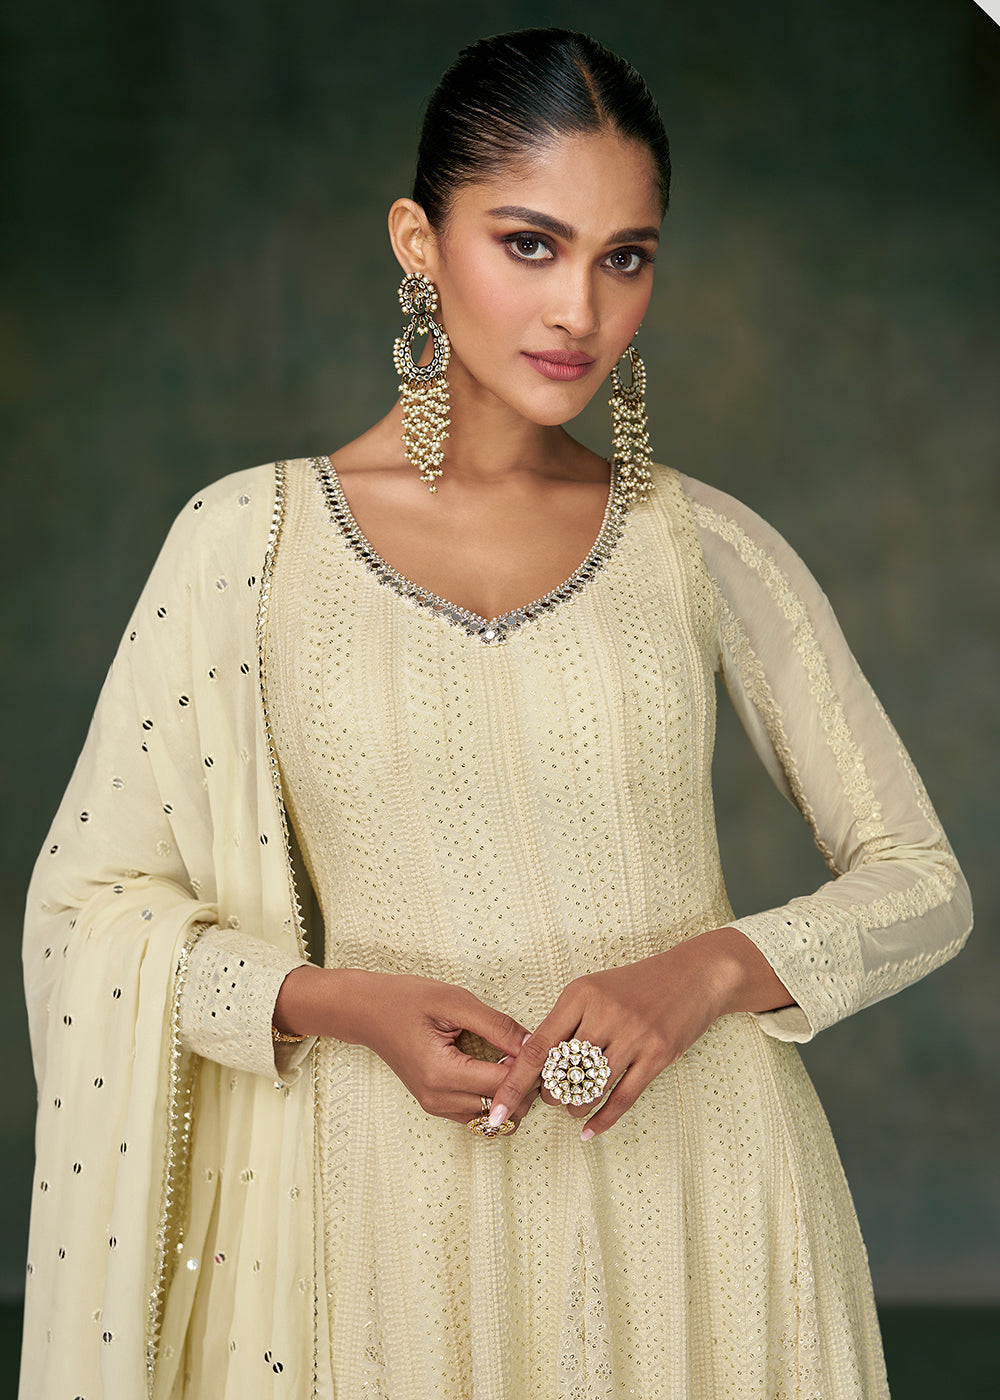 Buy Now Tempting Off White Georgette Embroidered Wedding Anarkali Suit Online in USA, UK, Australia, New Zealand, Canada & Worldwide at Empress Clothing. 